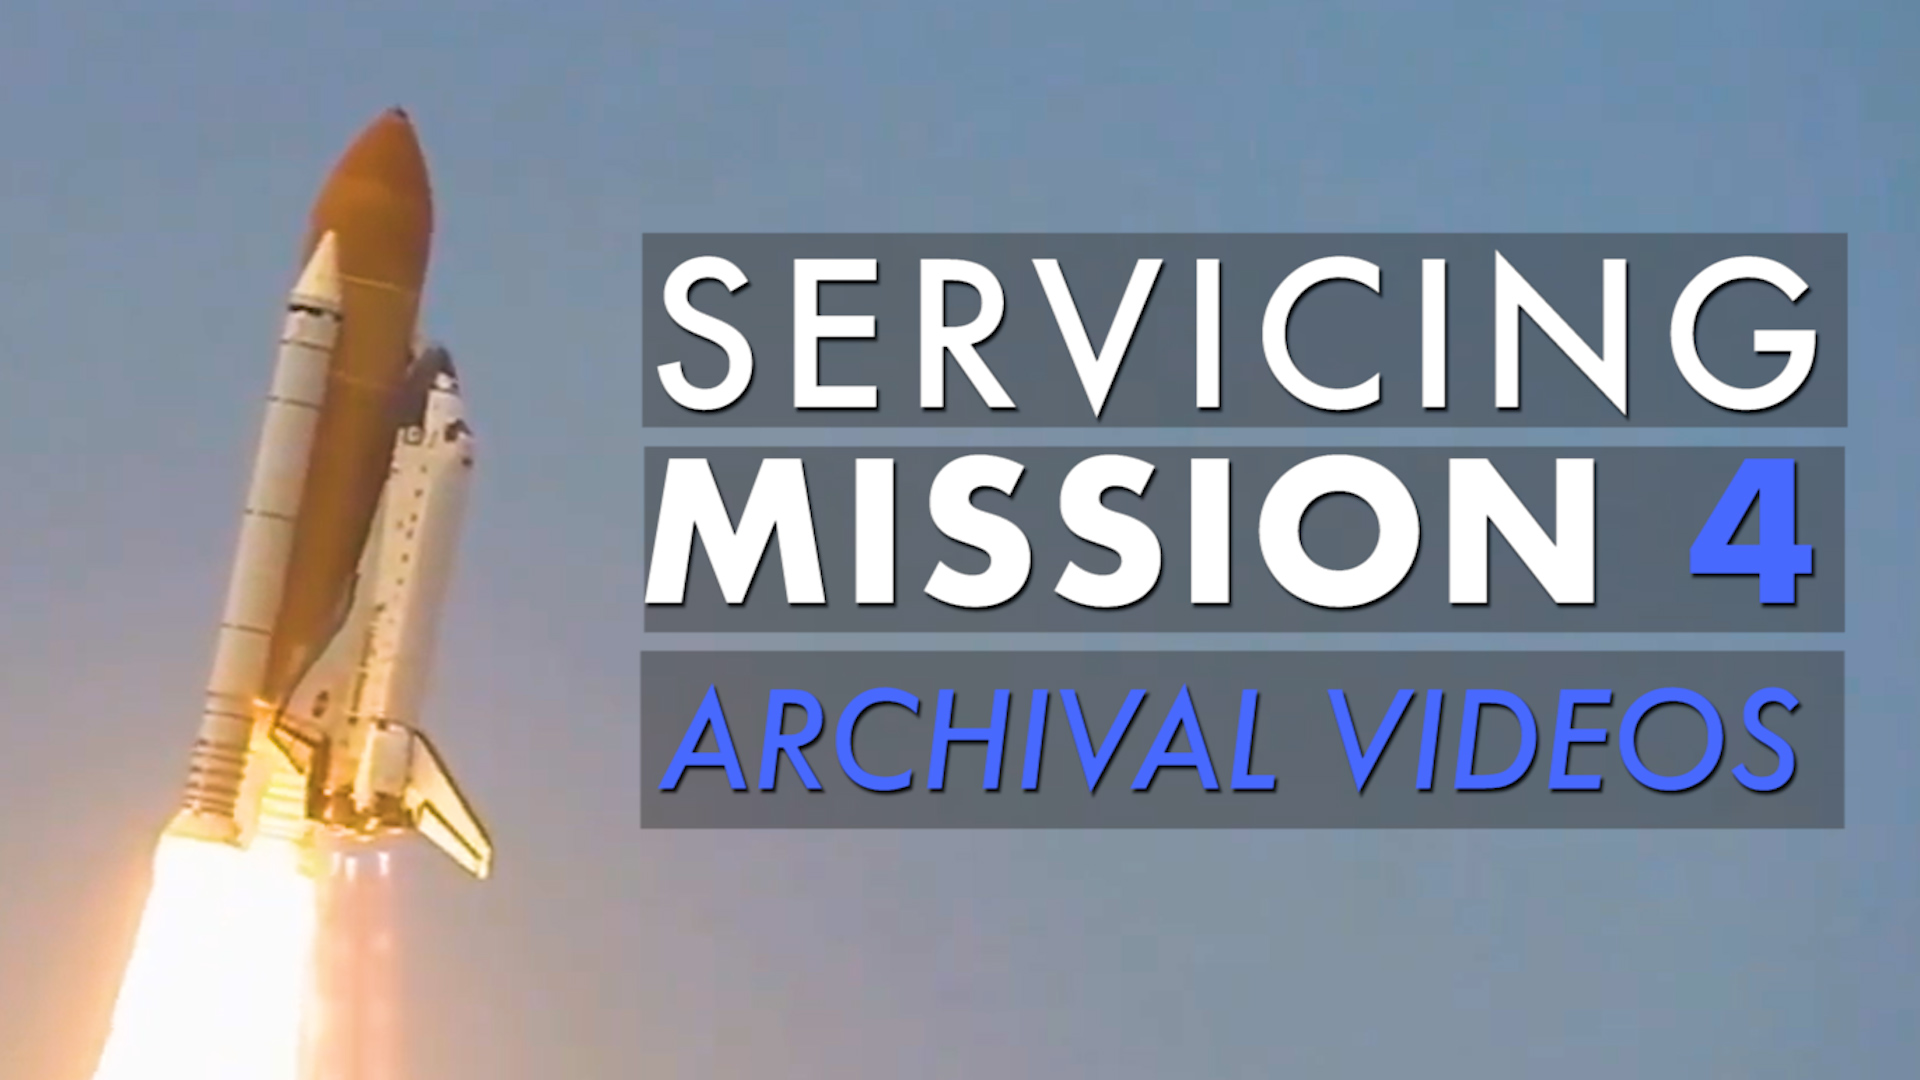 Servicing Mission 4 Archive TeaserThis horizontal version of the video is for use on the Hubble social media pages. Instagram, YouTube, and Facebook.